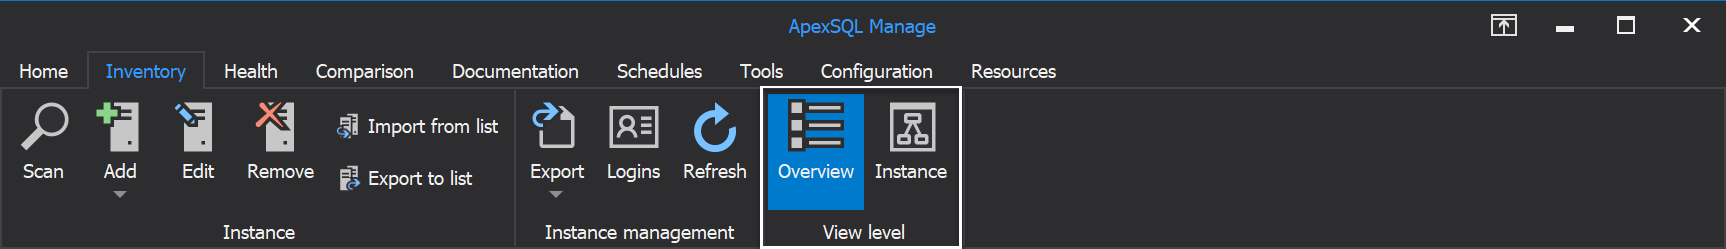 Overview and Instance view of SQL Server instances